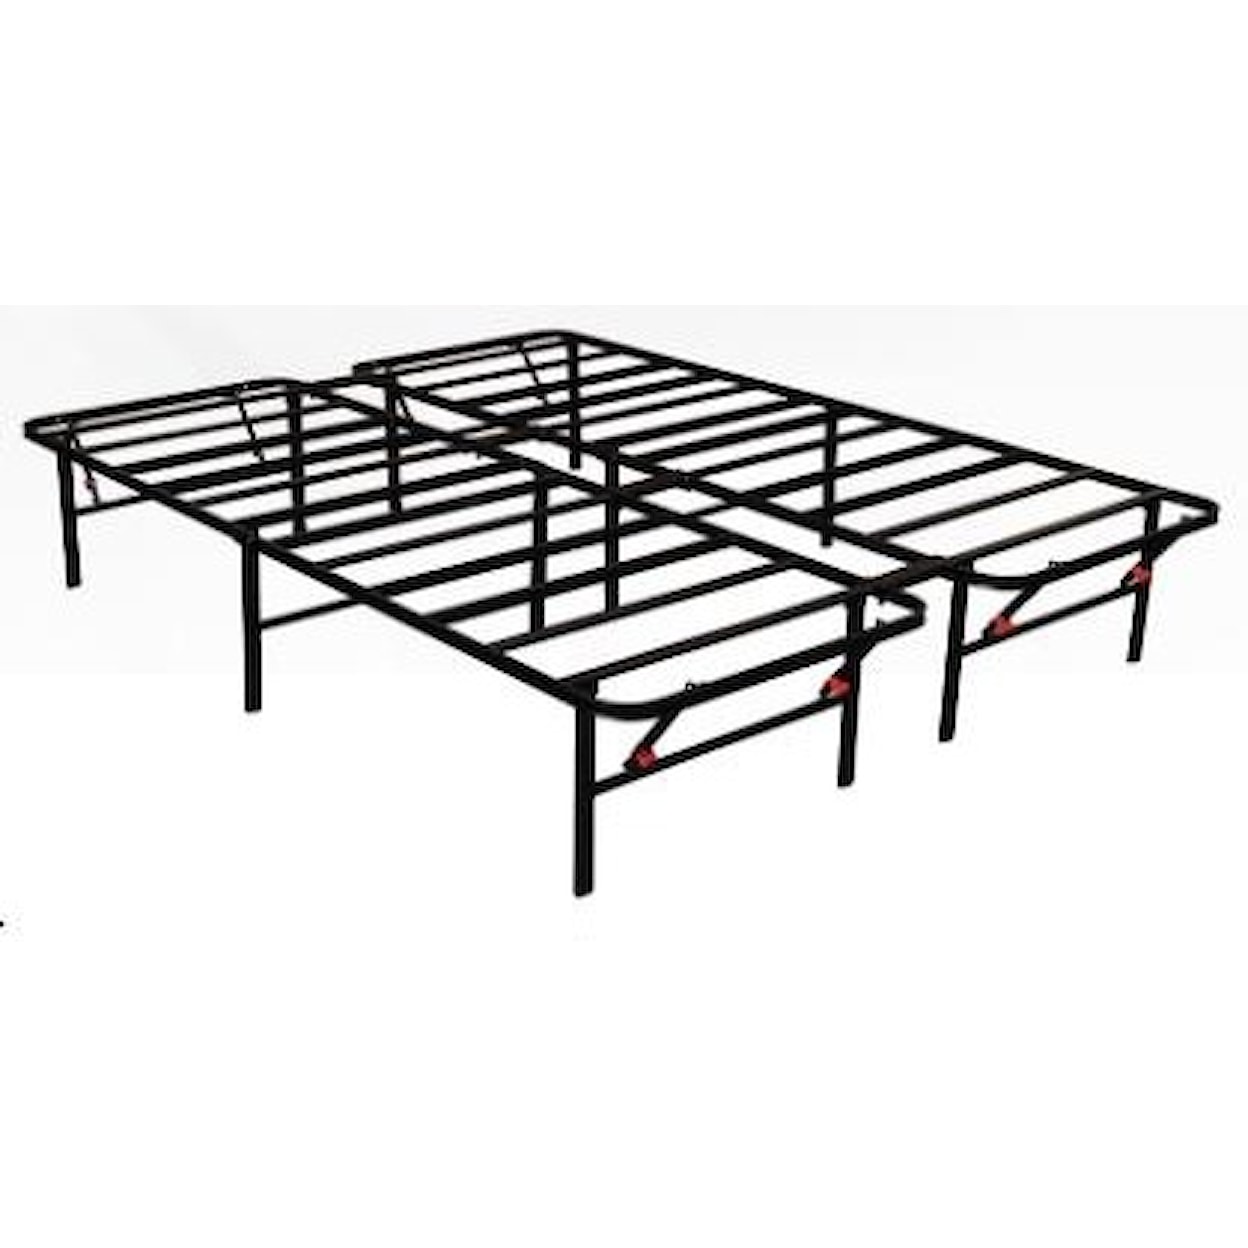 Hollywood Bed Frame Company The Bedder Base Queen Bed Frame